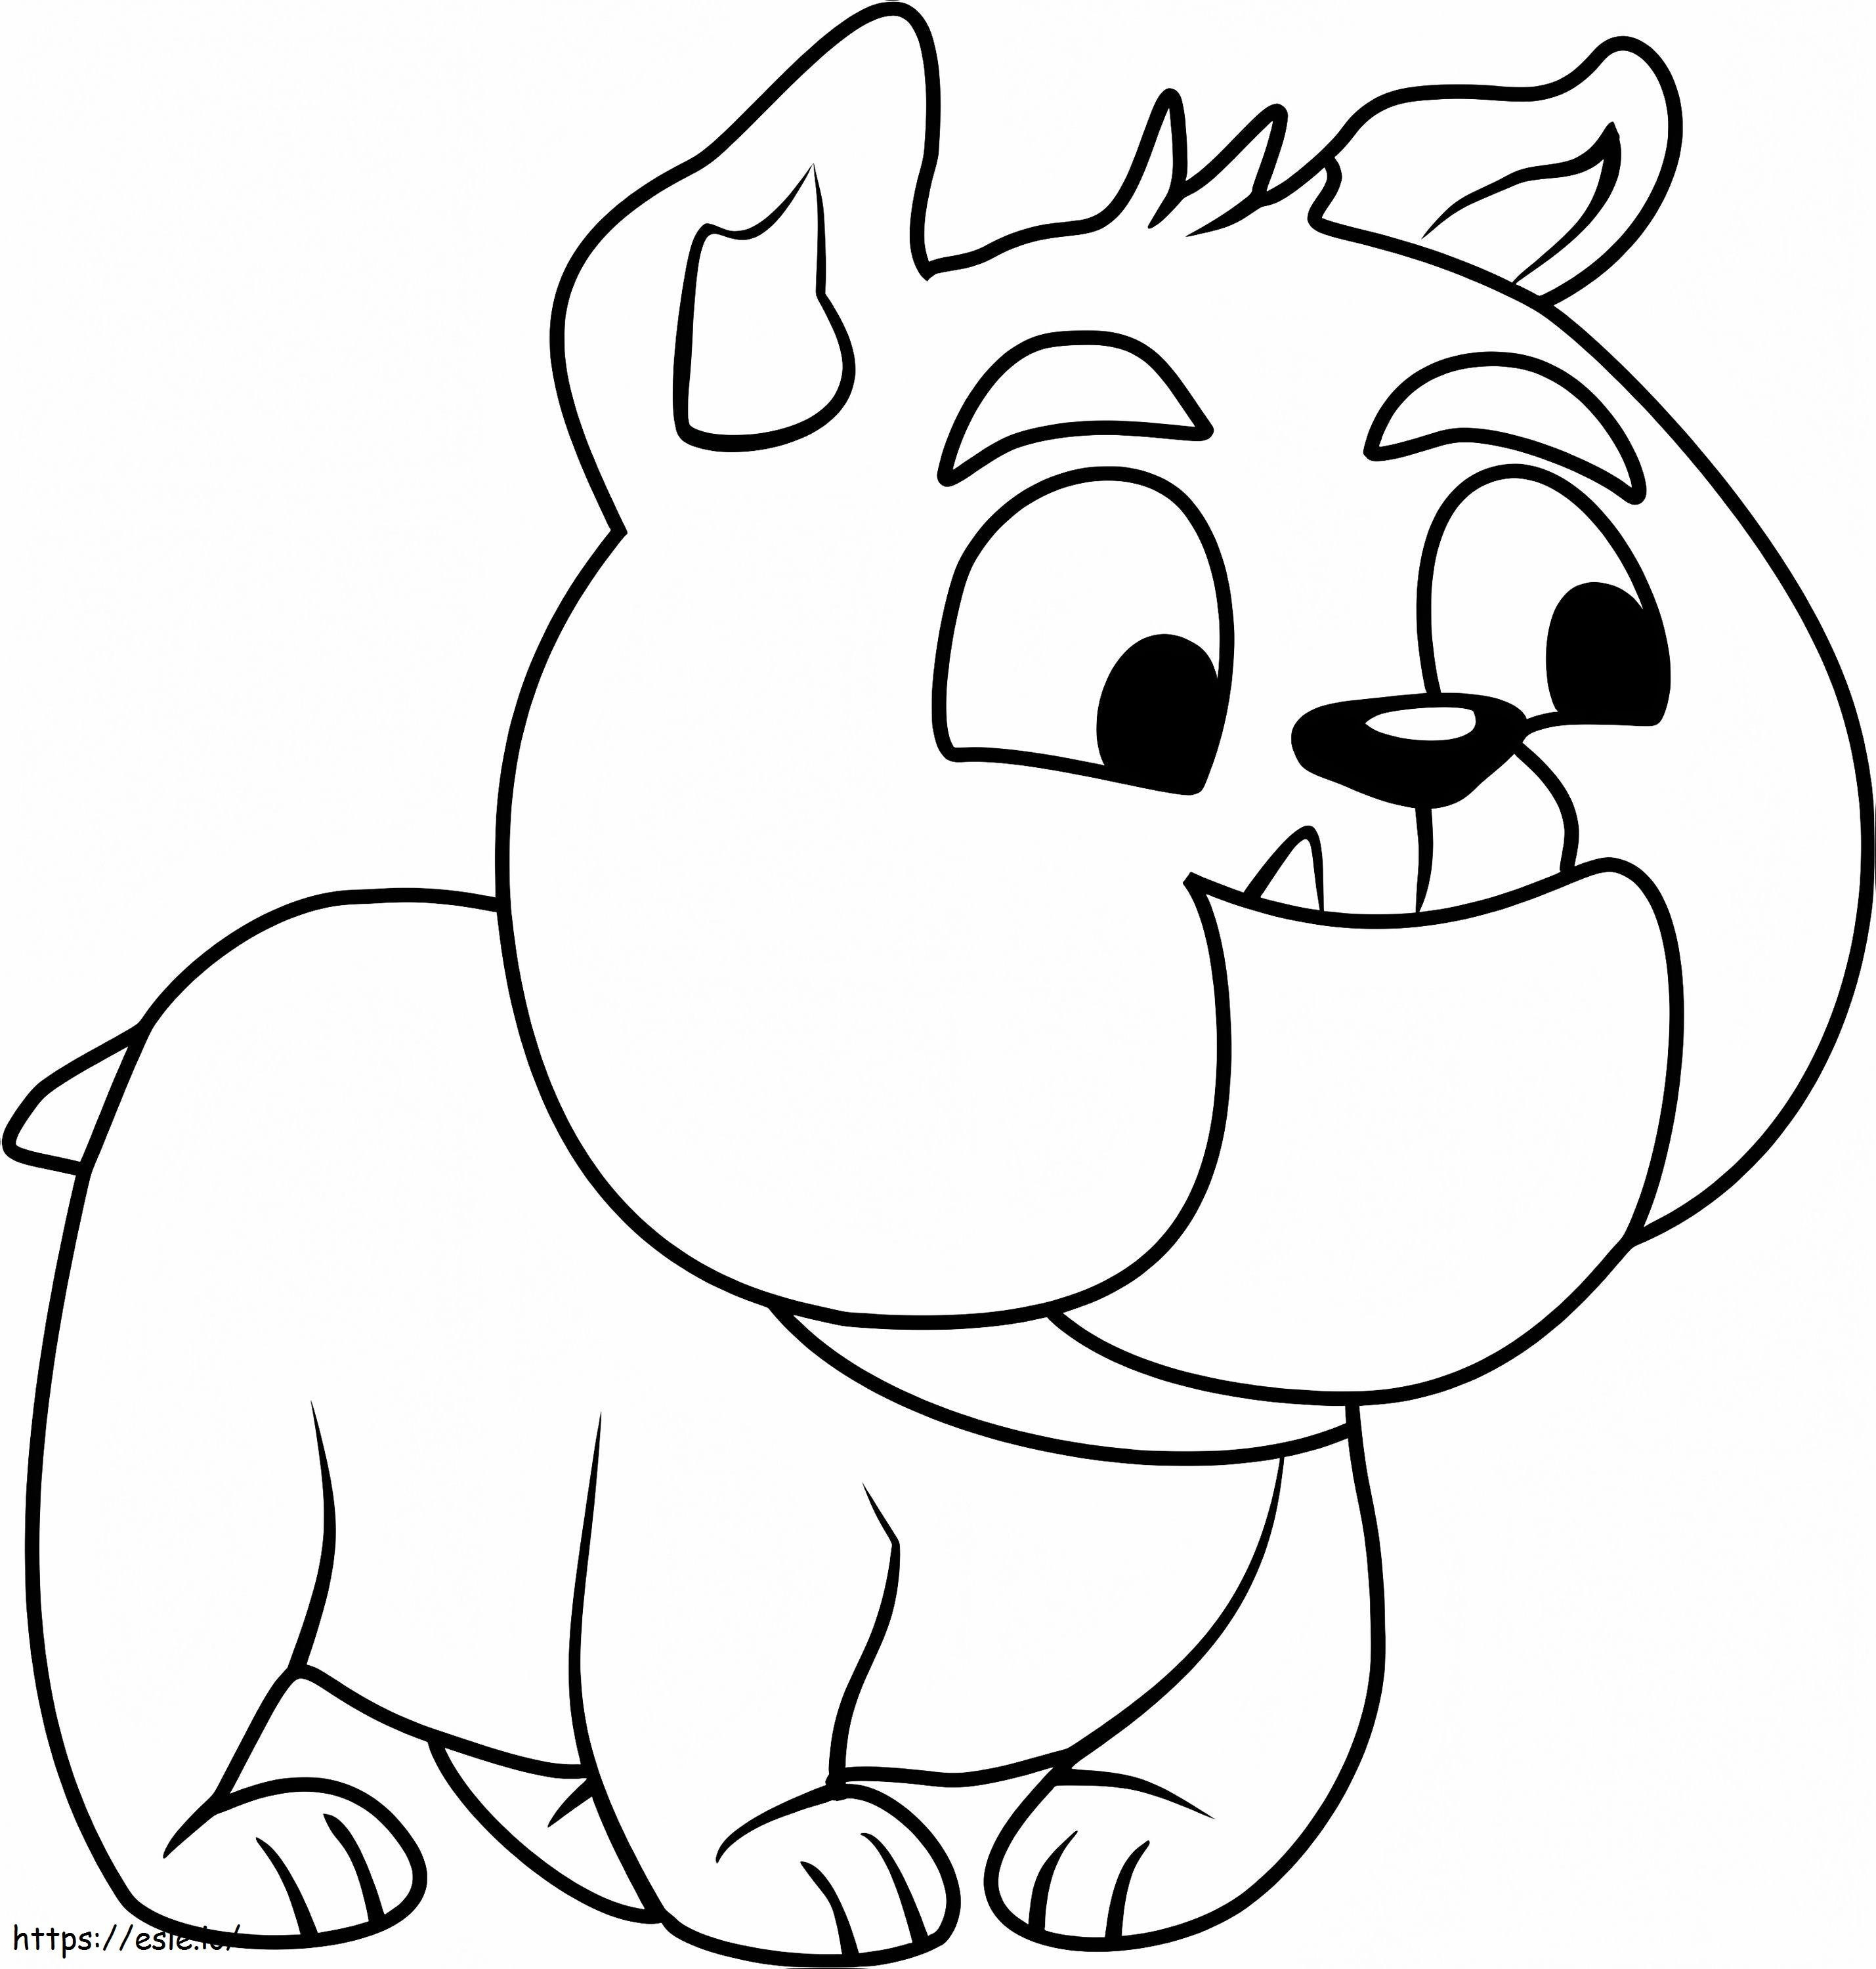 Marshmallow From Pound Puppies coloring page